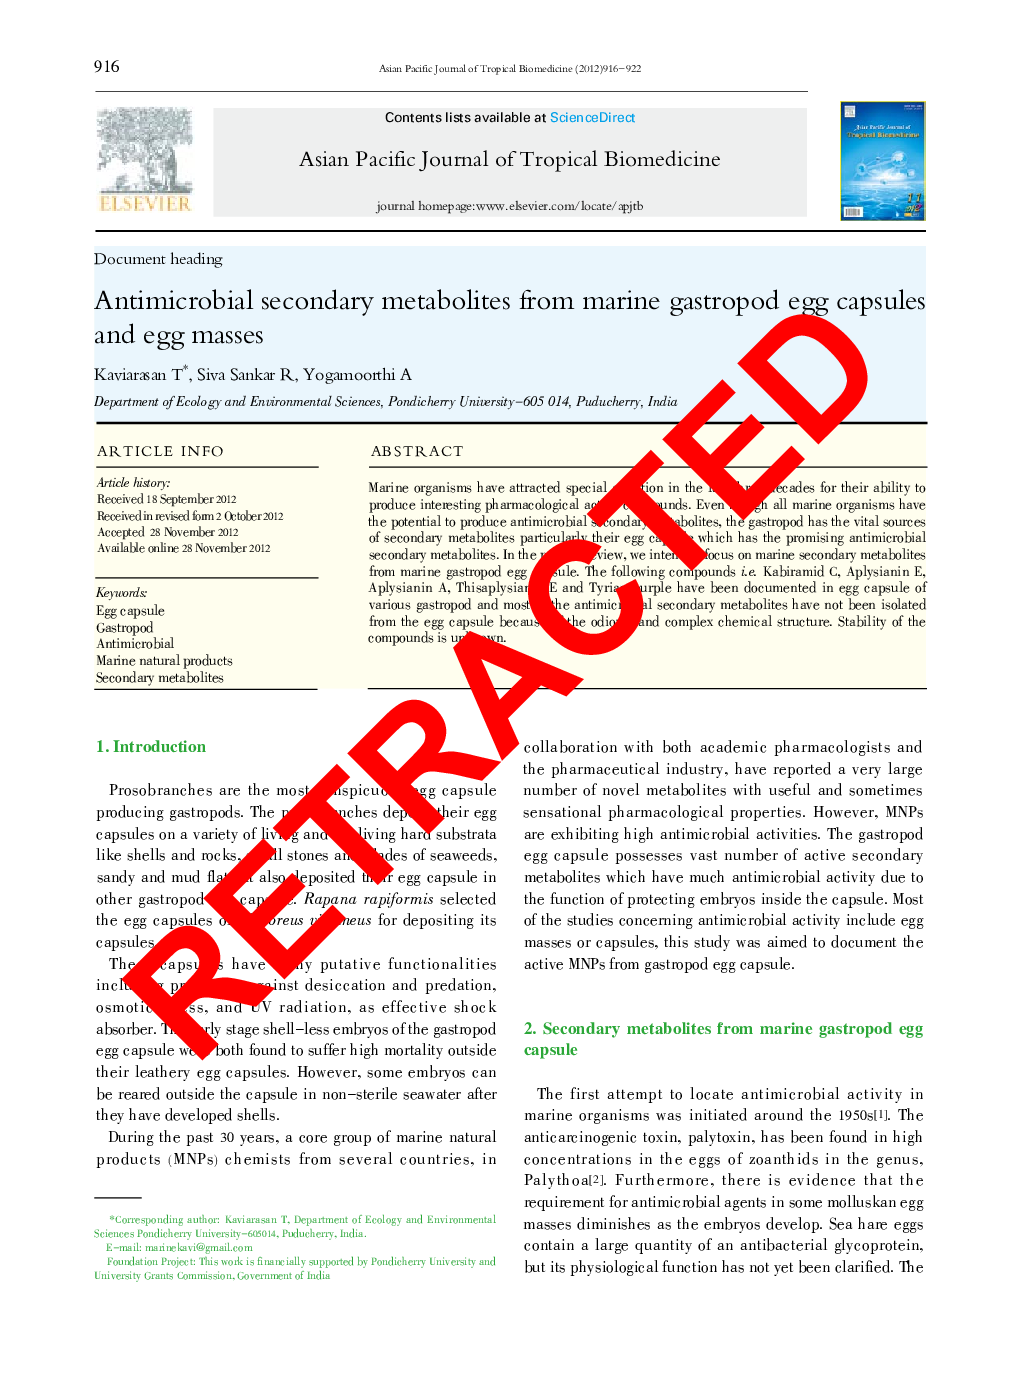 RETRACTED: Antimicrobial secondary metabolites from marine gastropod egg capsules and egg masses